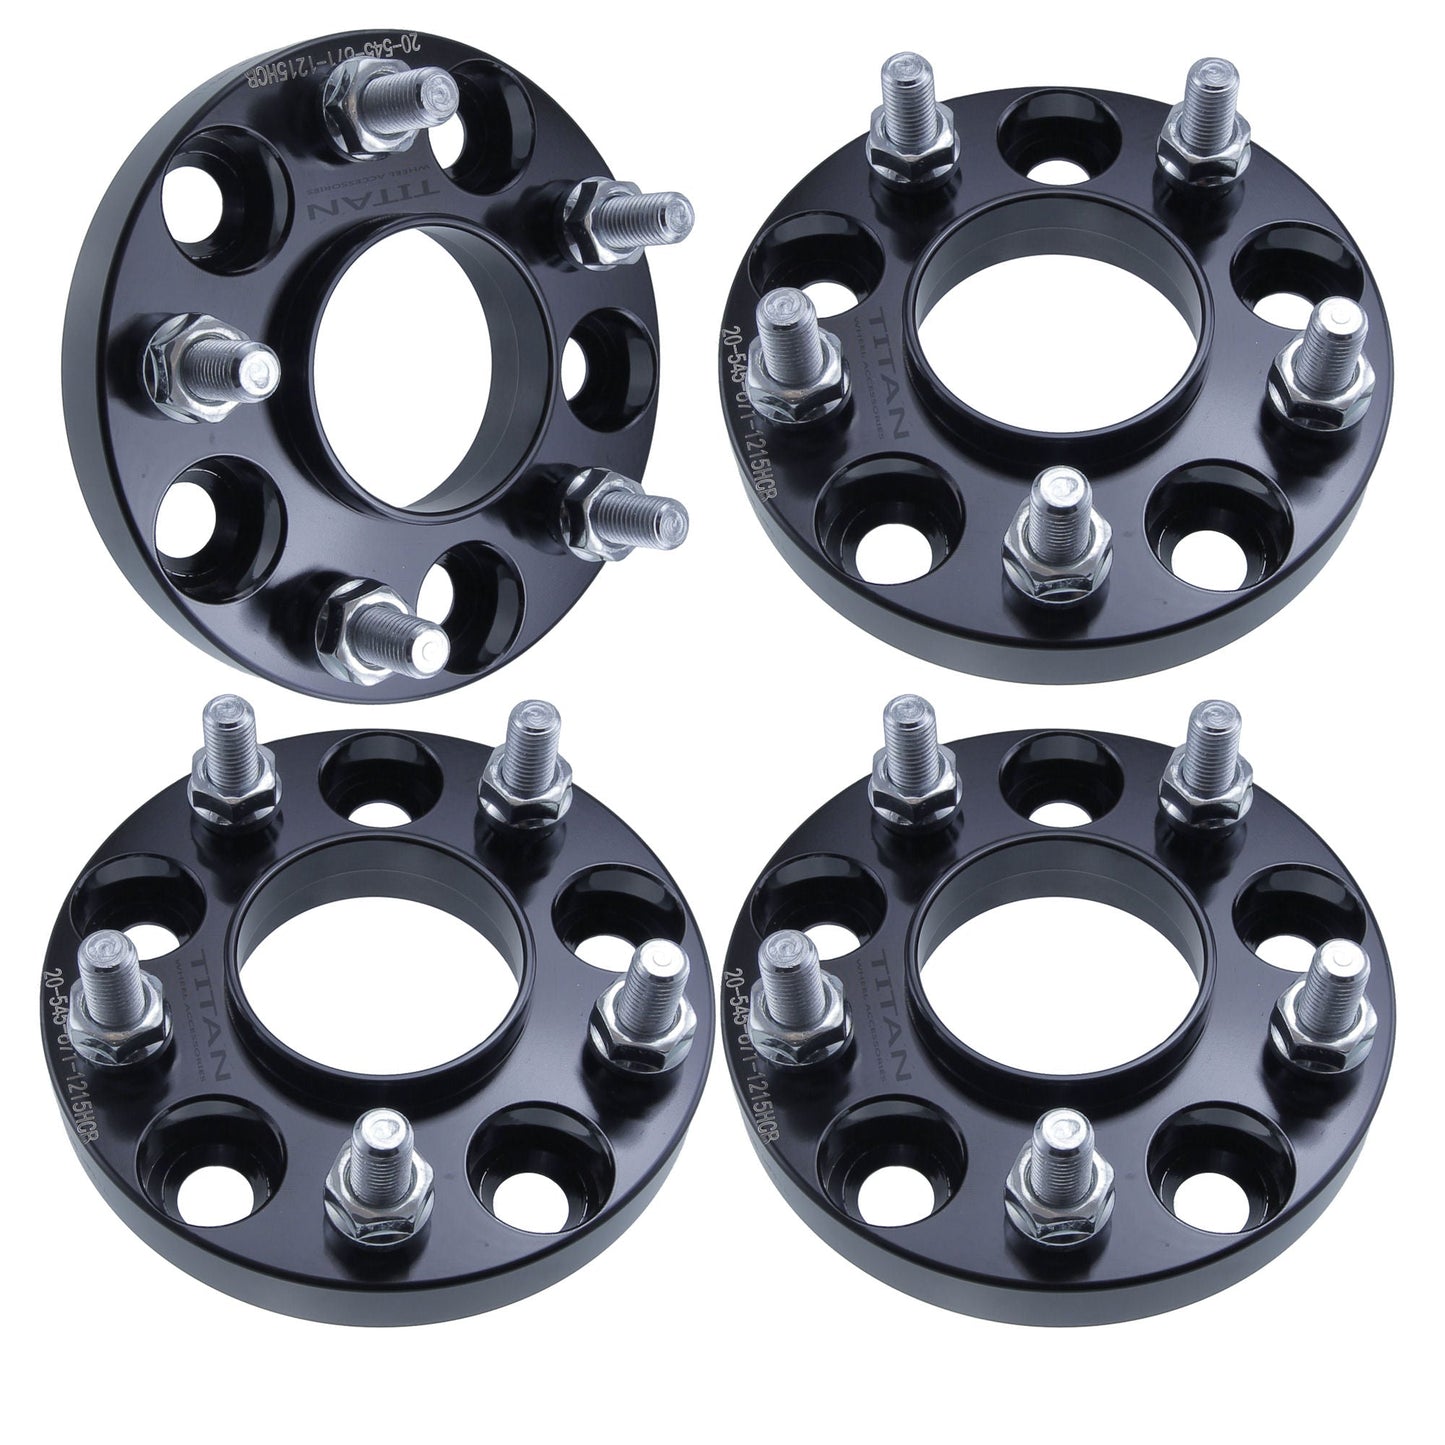 15mm Titan Wheel Spacers for Jeep Compass Patriot Prospector | 5x114.3 (5x4.5) | 67.1 Hubcentric |12x1.25 Studs |  Set of 4 | Titan Wheel Accessories